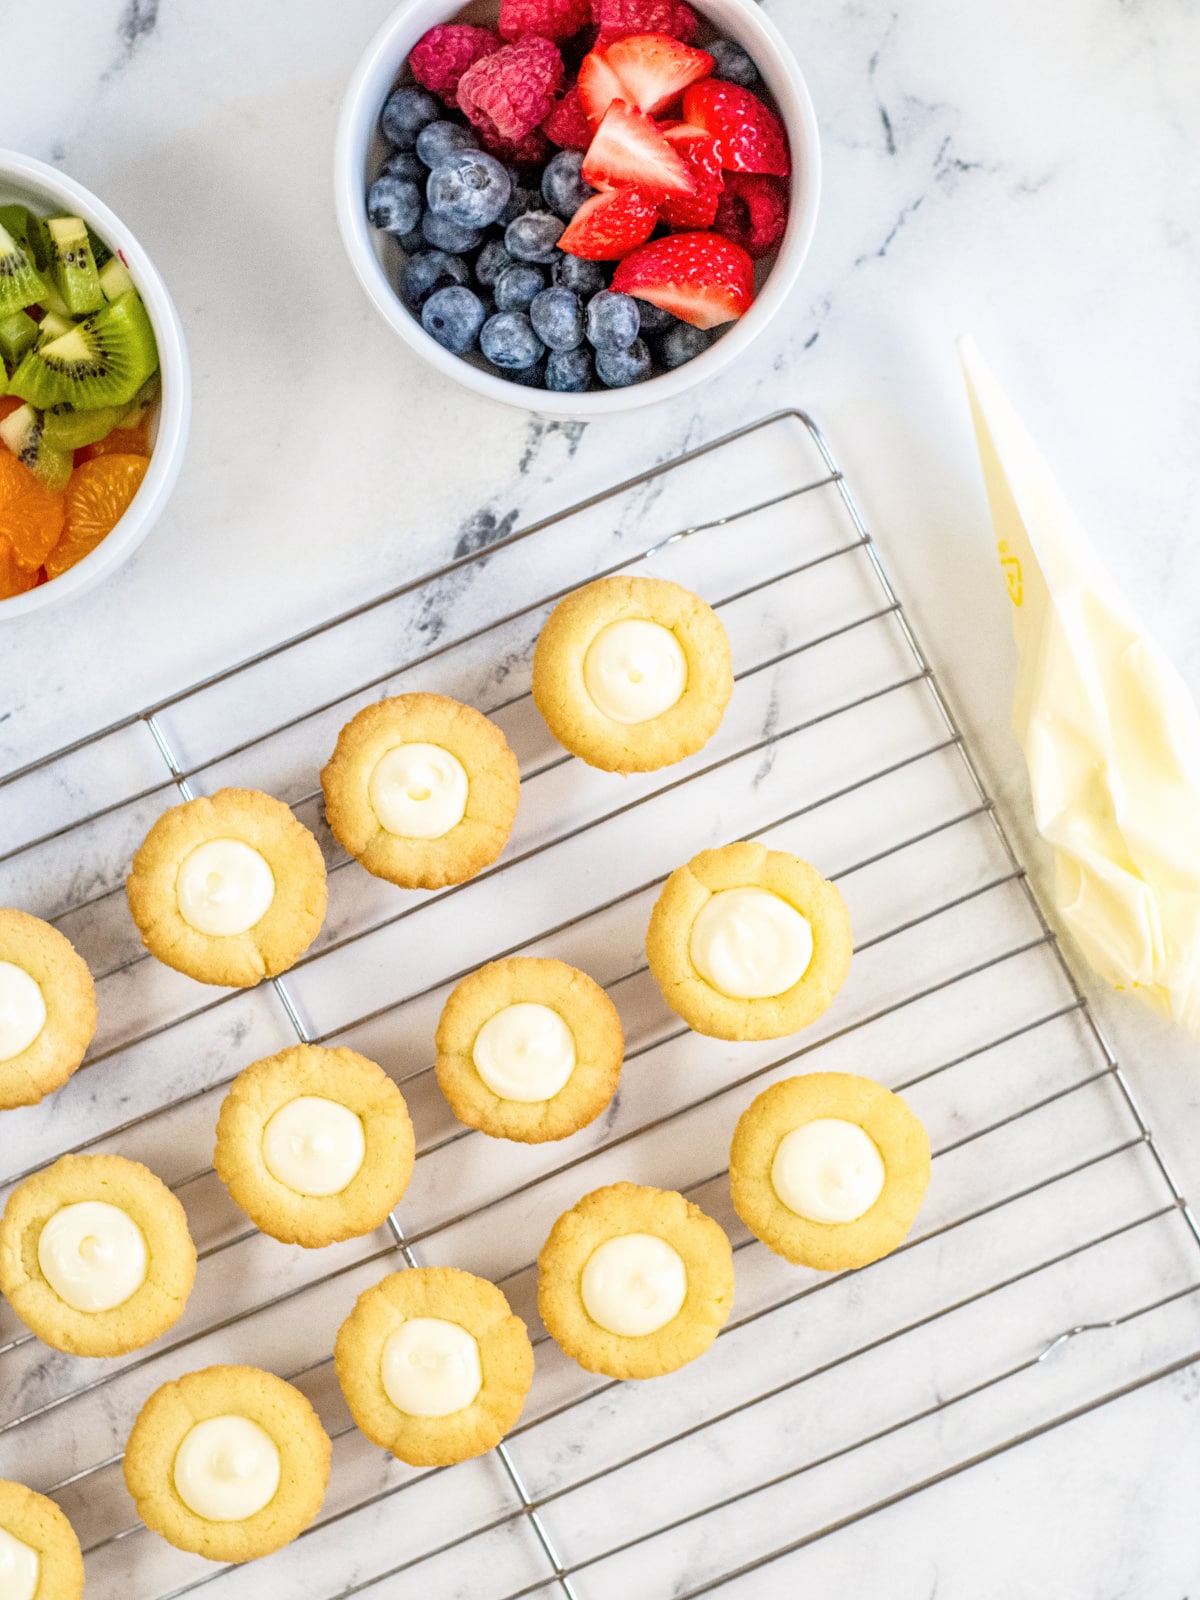 fill each mini fruit tart with the cream cheese mixture